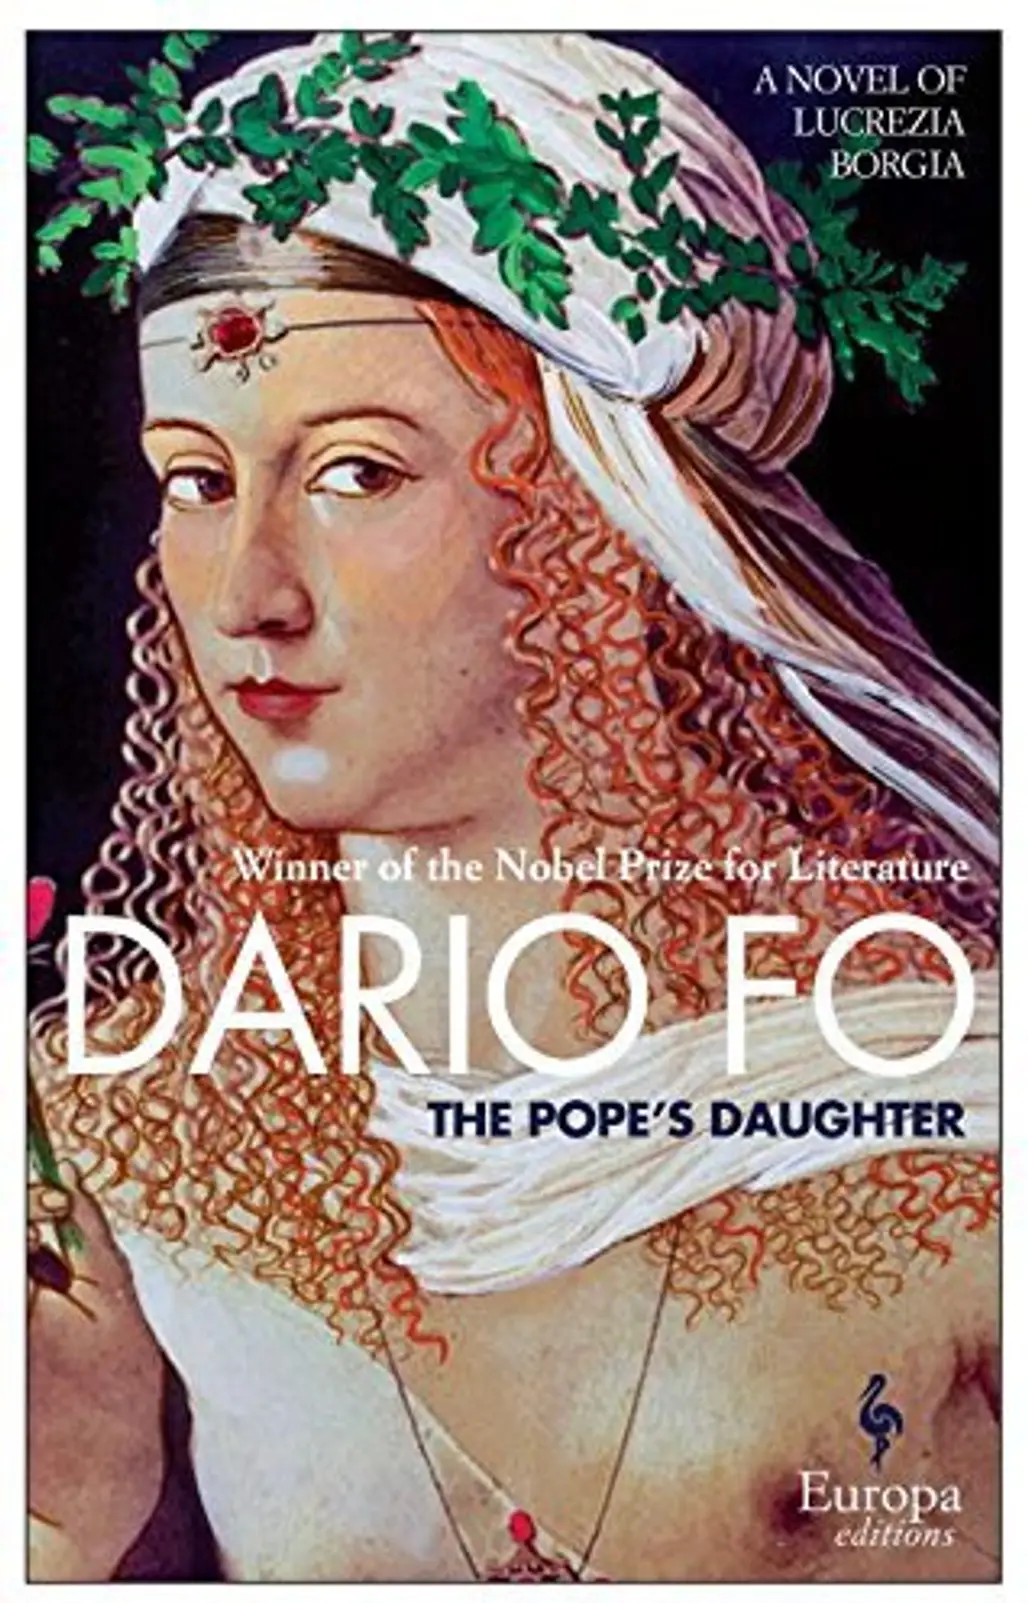 The Pope’s Daughter by Dario Fo